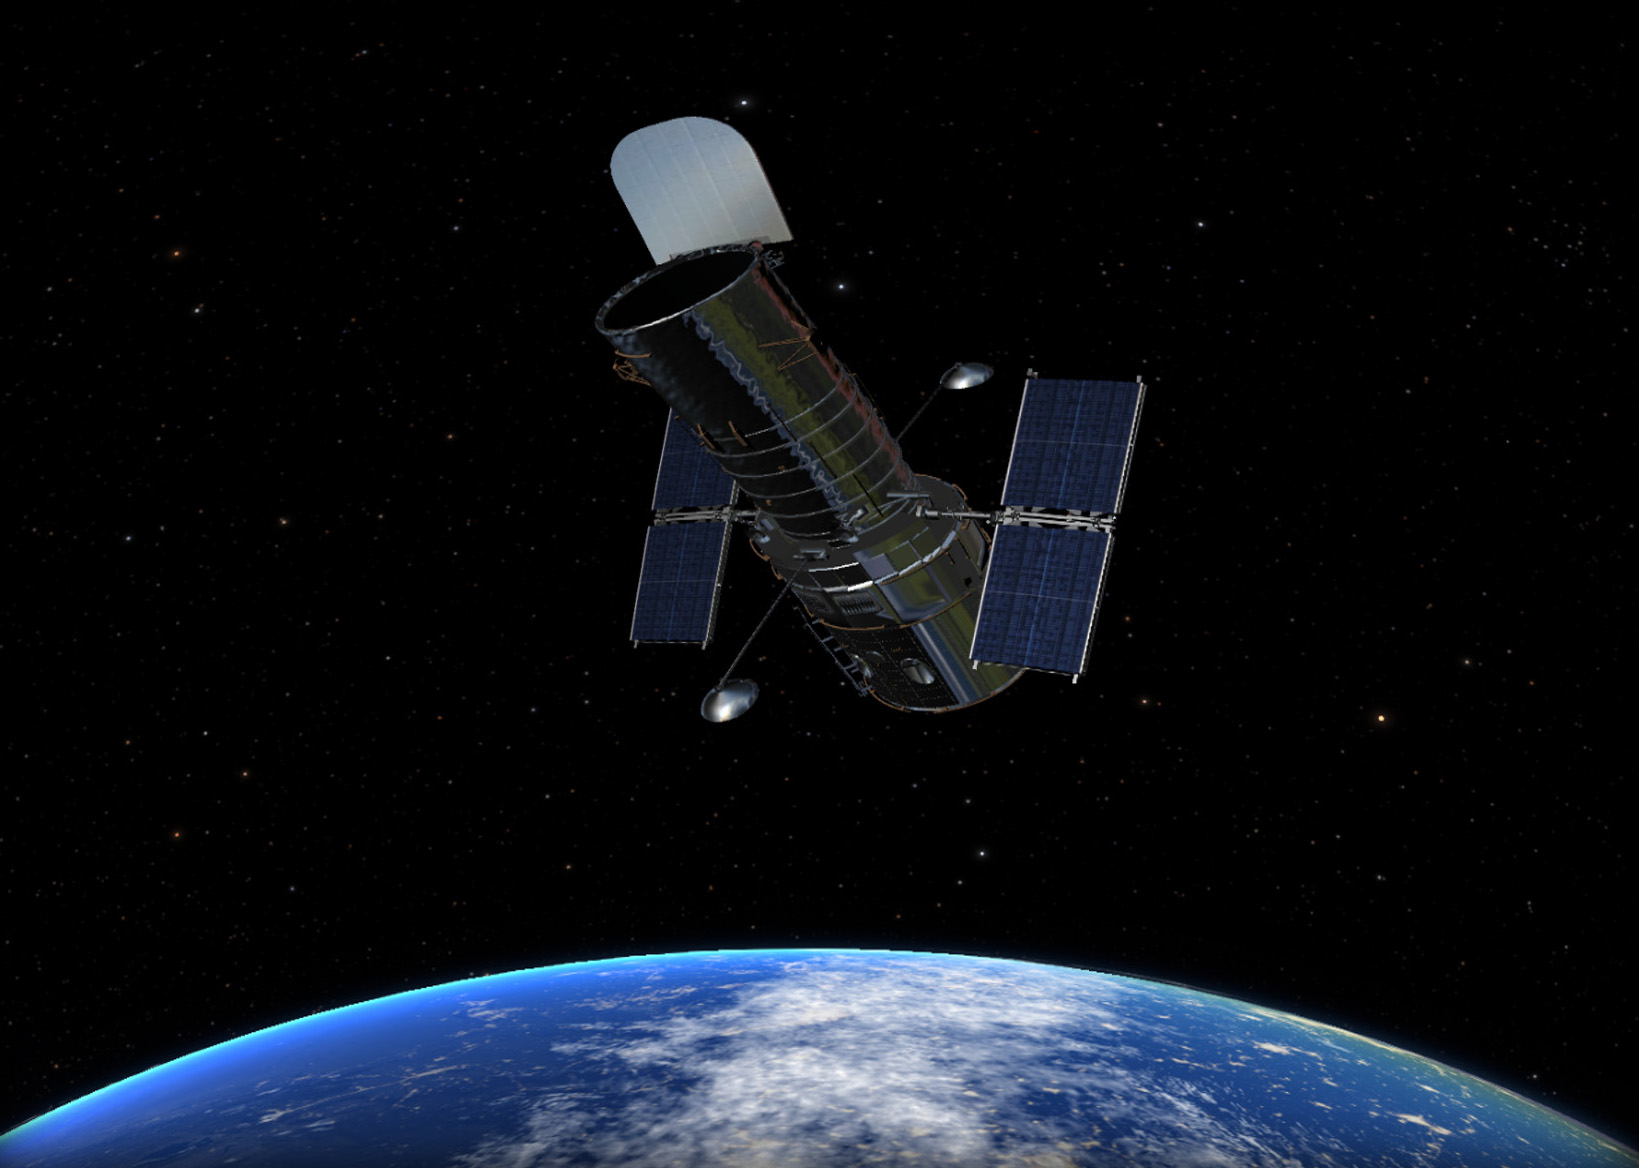 The Hubble Space Telescope floats above the Earth in the Dark Matter immersive planetarium software